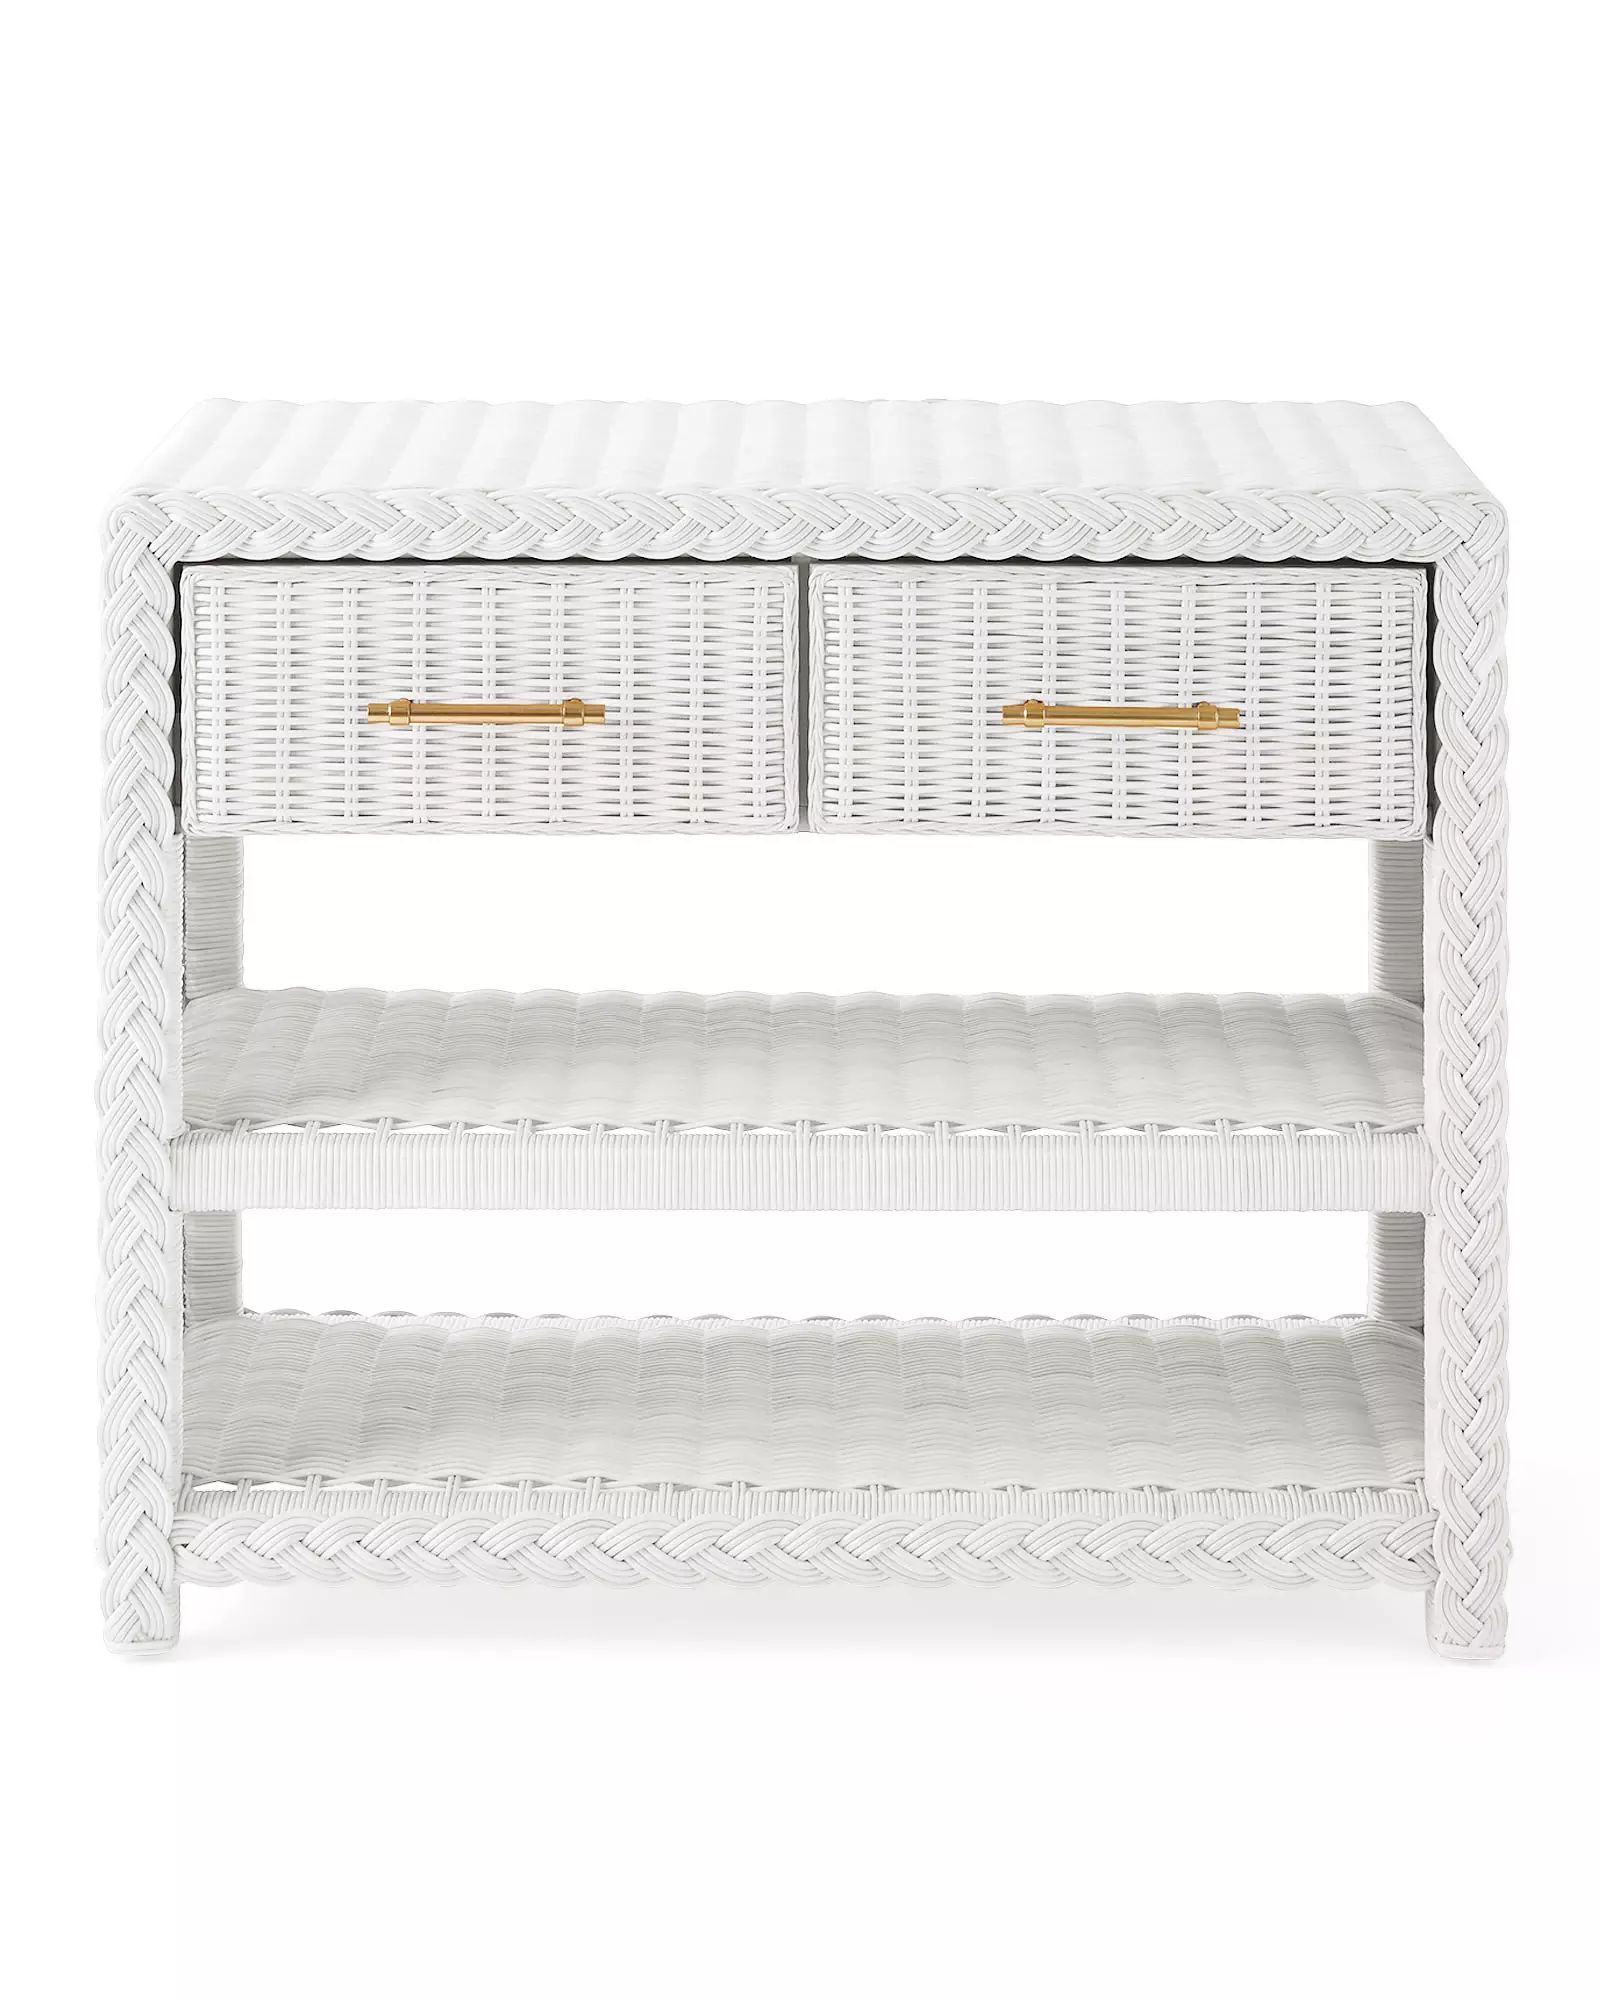 Bungalow Nightstand - White | Serena and Lily